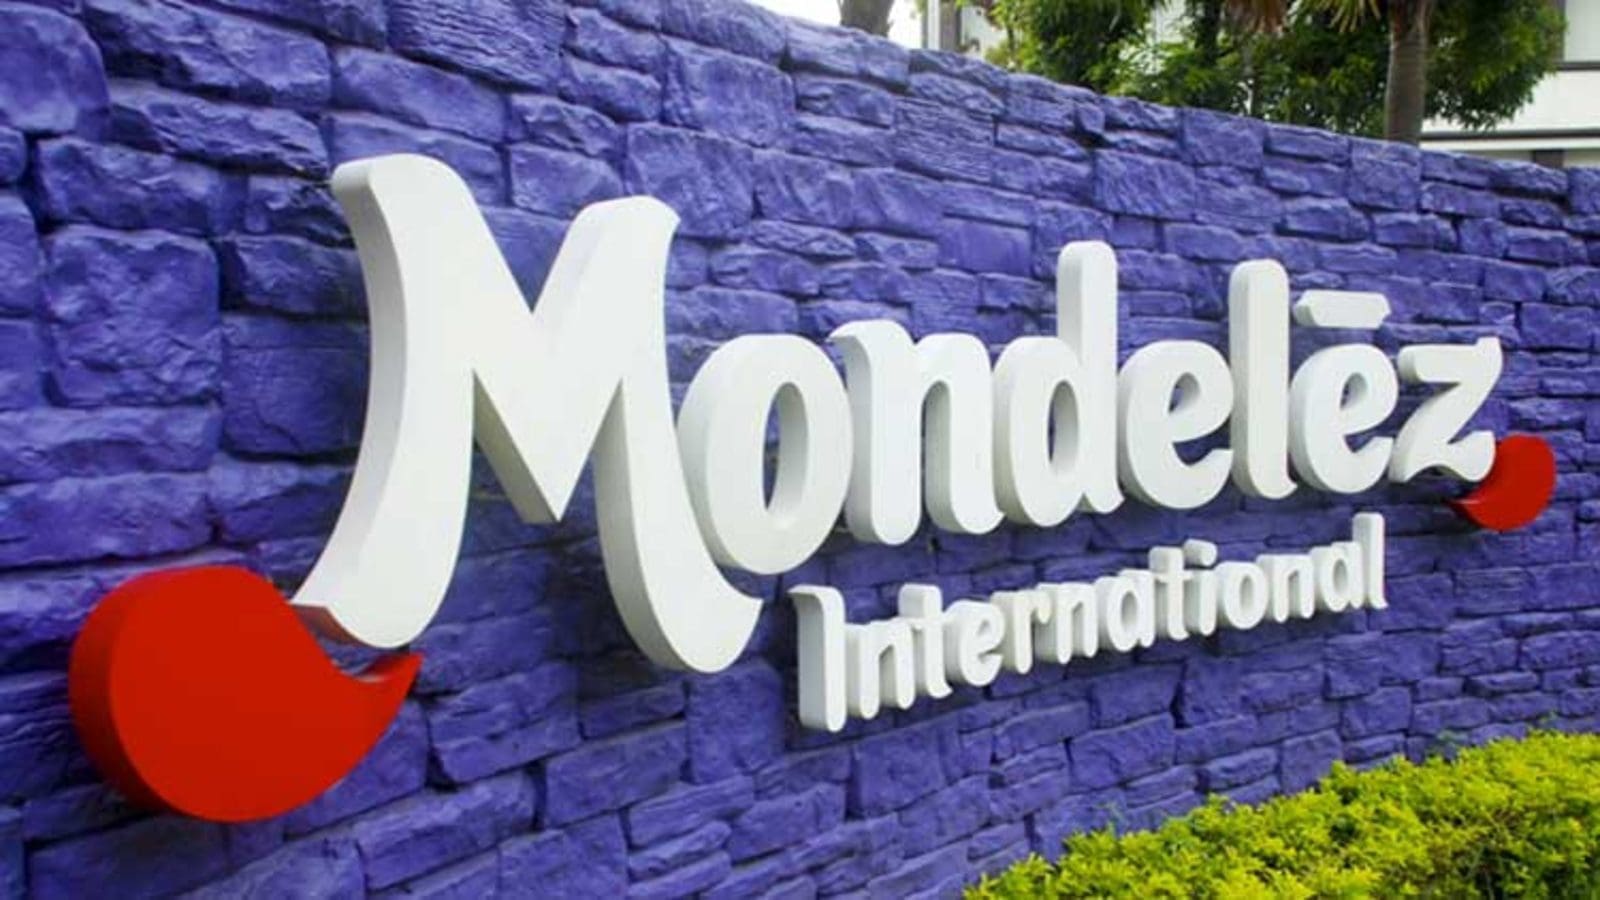 Mondelēz International posts 9.7% FY2022 revenue rise boosted by strong performance in emerging markets